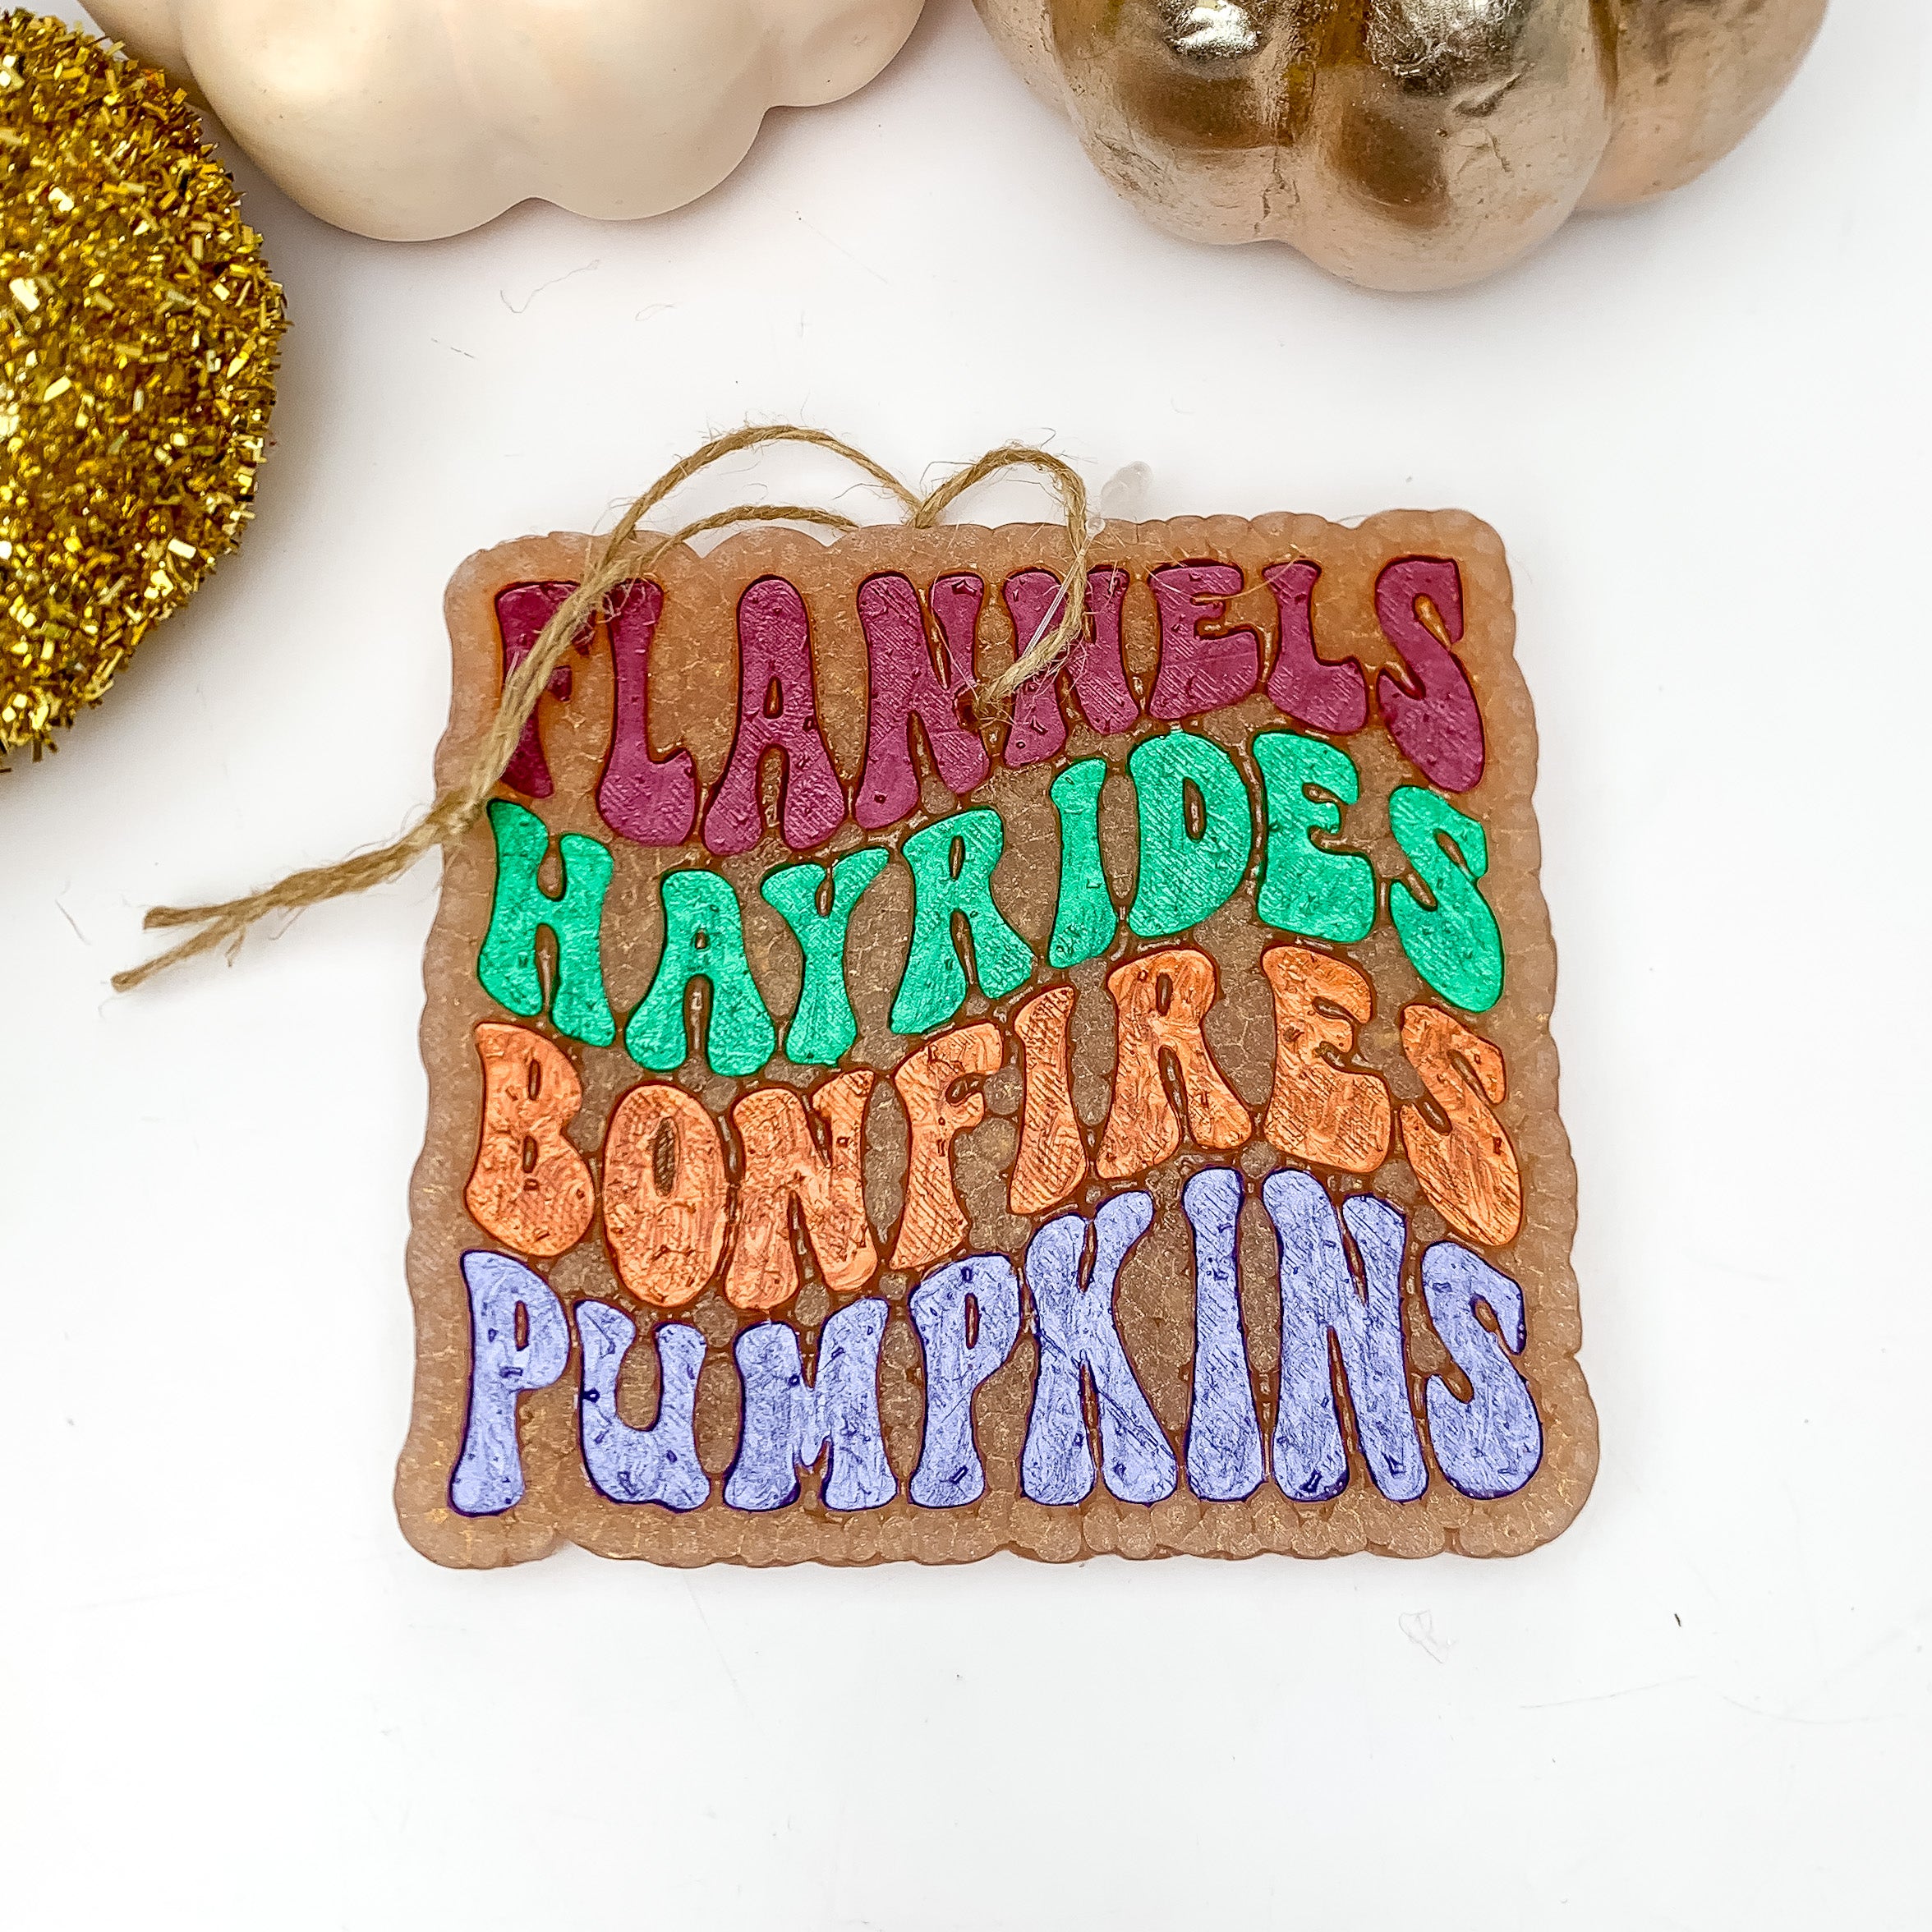 "Flannels Hayrides Bonfires Pumpkins" Freshie in Butter Pecan Waffles. This freshie is pictured on a white background with pumpkins above the freshie.